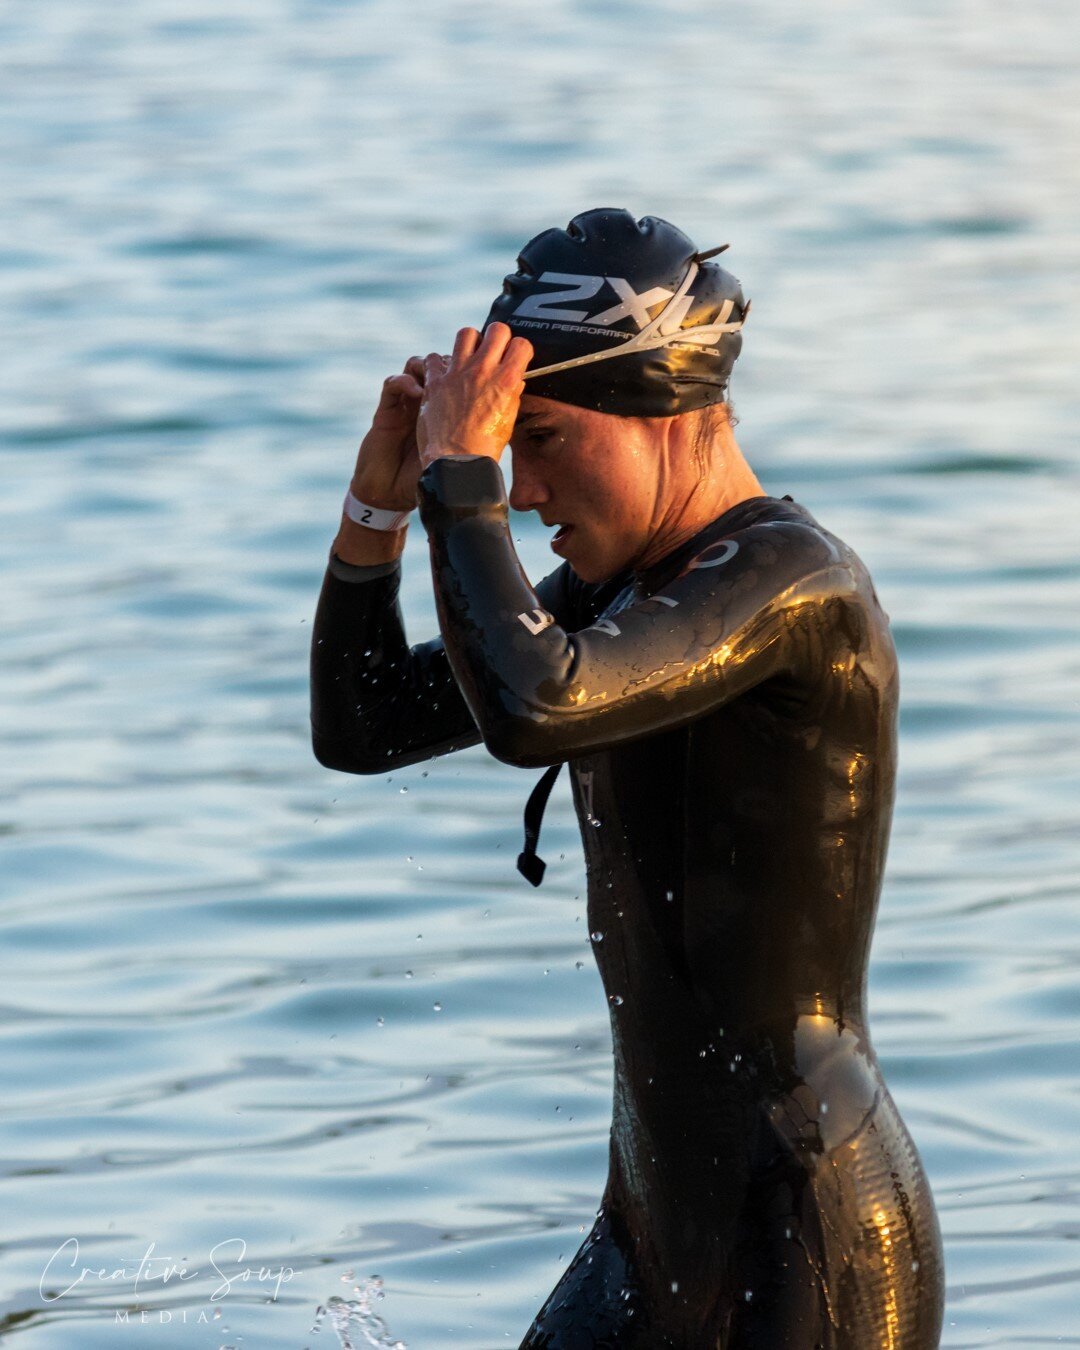 Grace Thek // Huskisson, Jervis Bay NSW

Professional triathlete @gracethek racing out of the water in the pro category in the Ultimate triathlon, at the Shimano Husky Triathlon Festival 2021. Grace finished in 4th place behind @elliesalthouse1, @ame